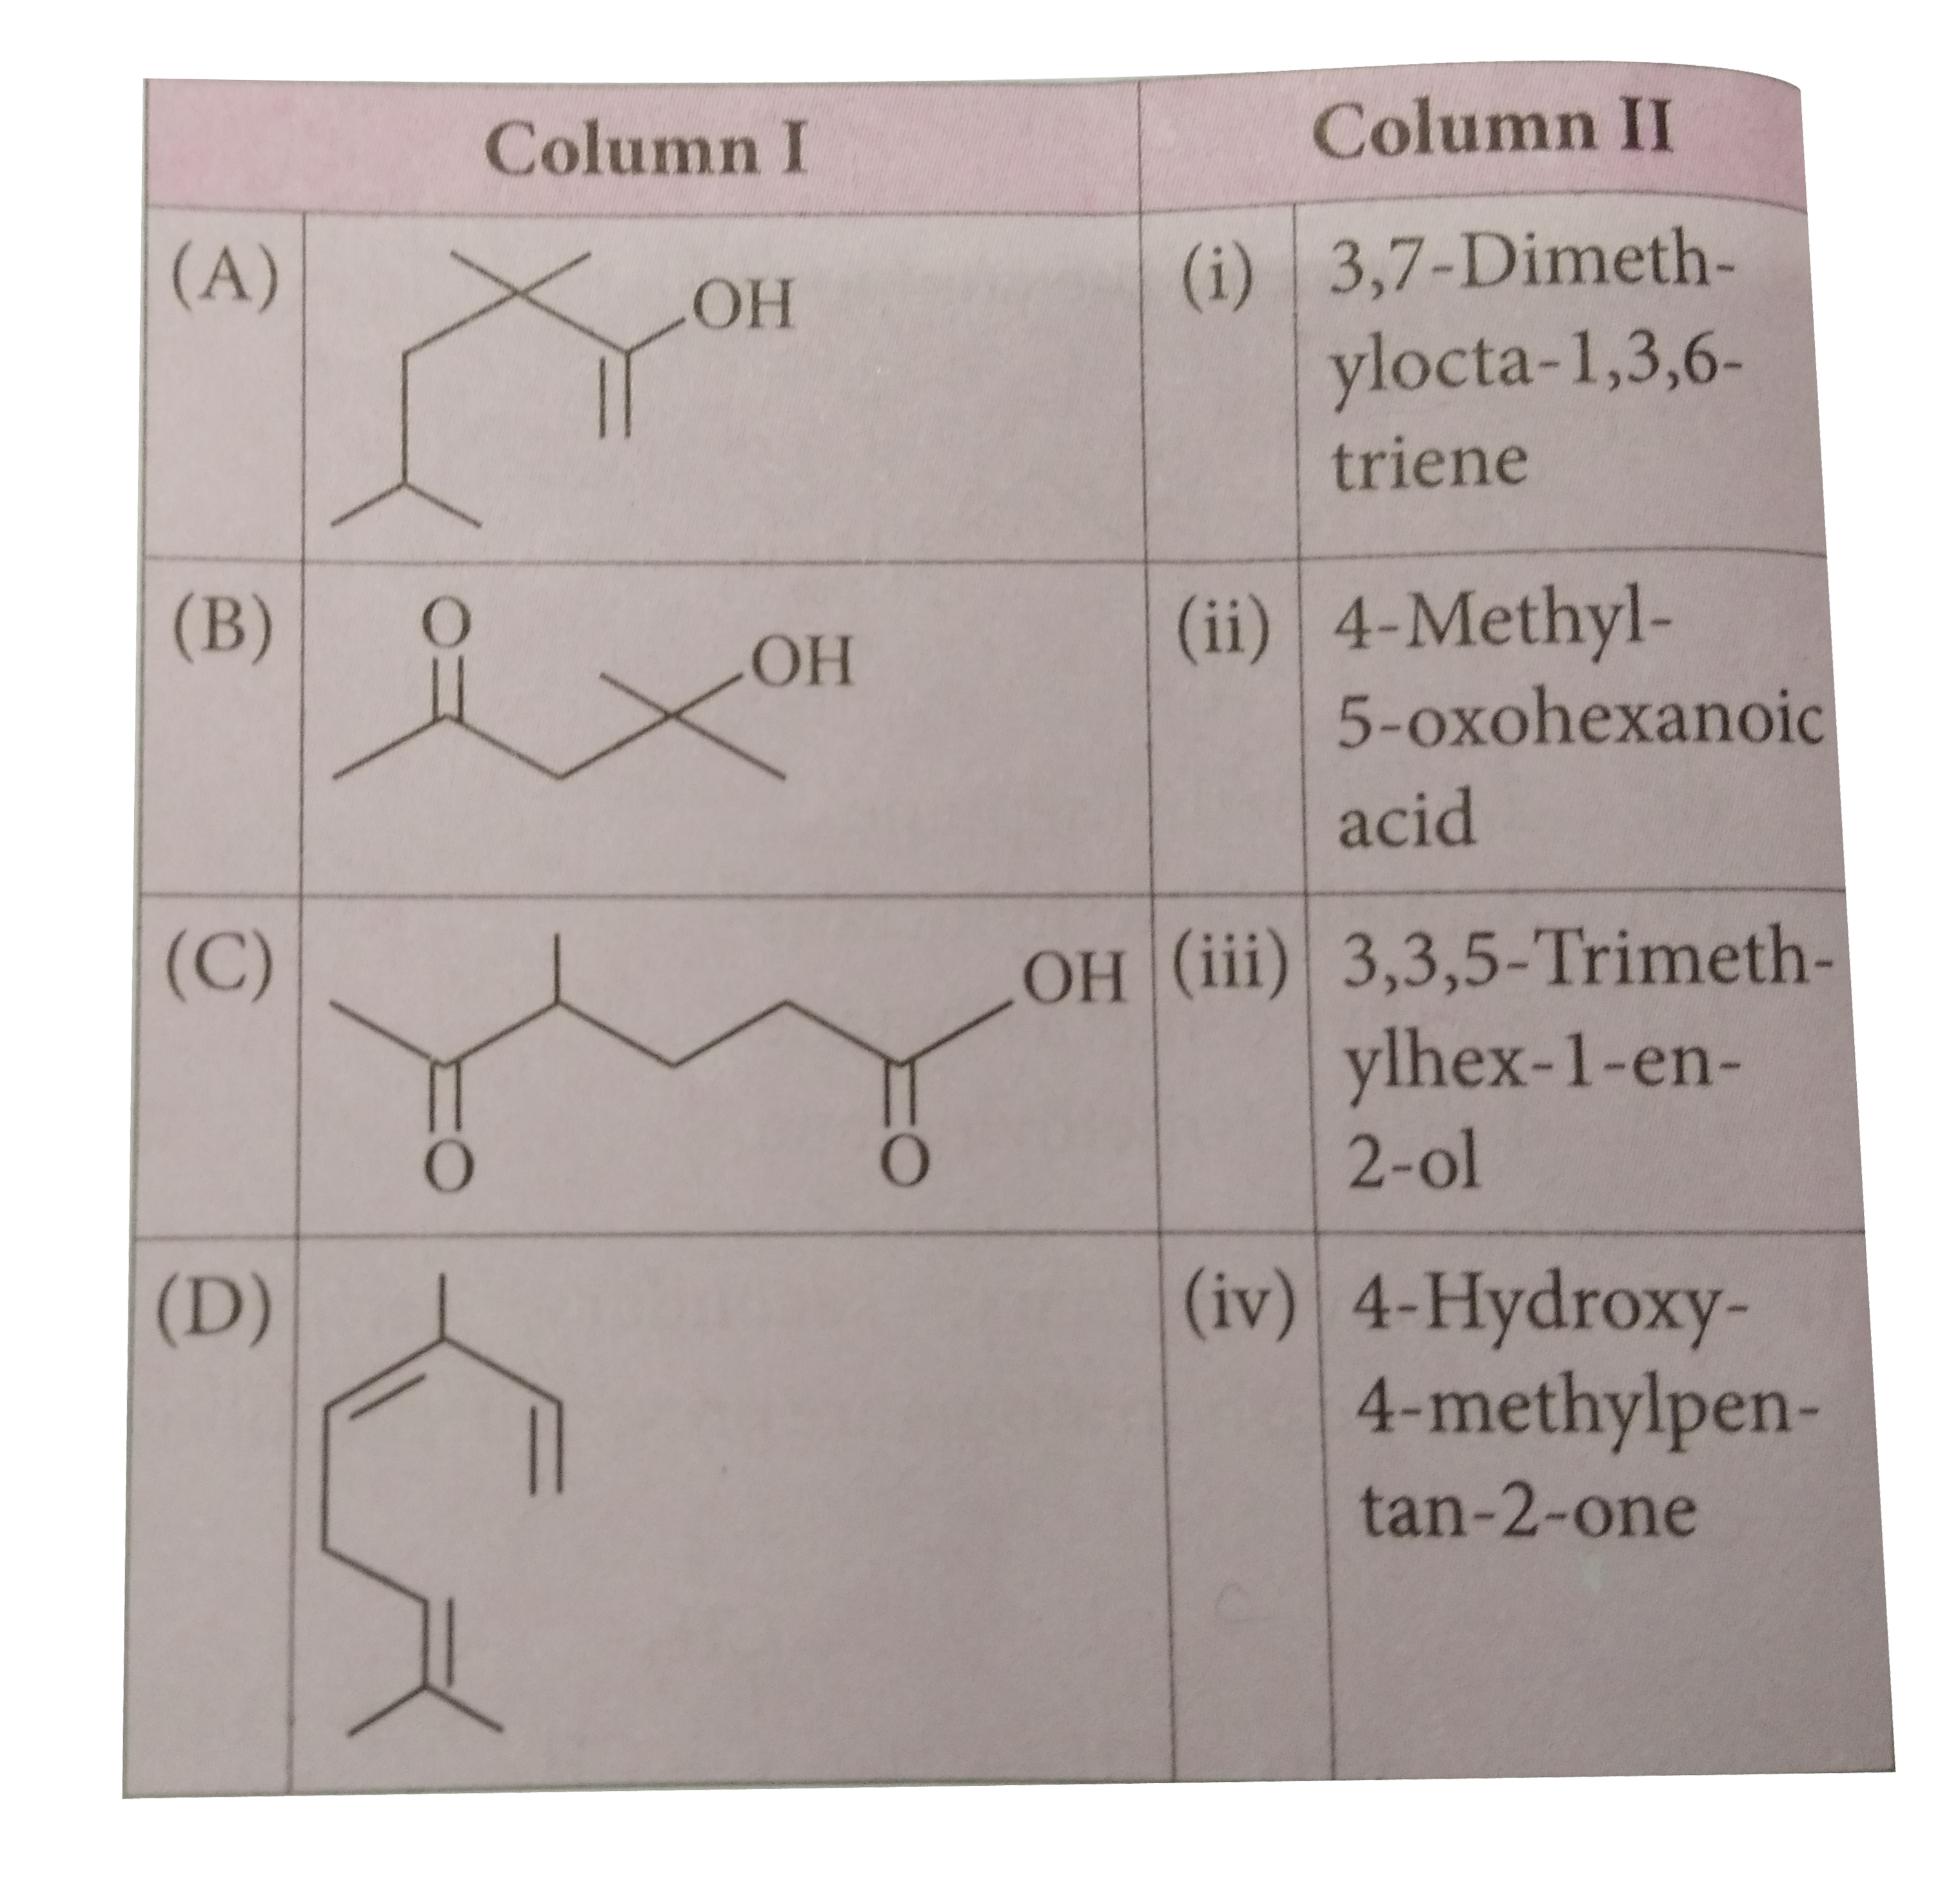 Match the compounds given in column I with the IUPAC names given in column II and mark the appropriate choice.